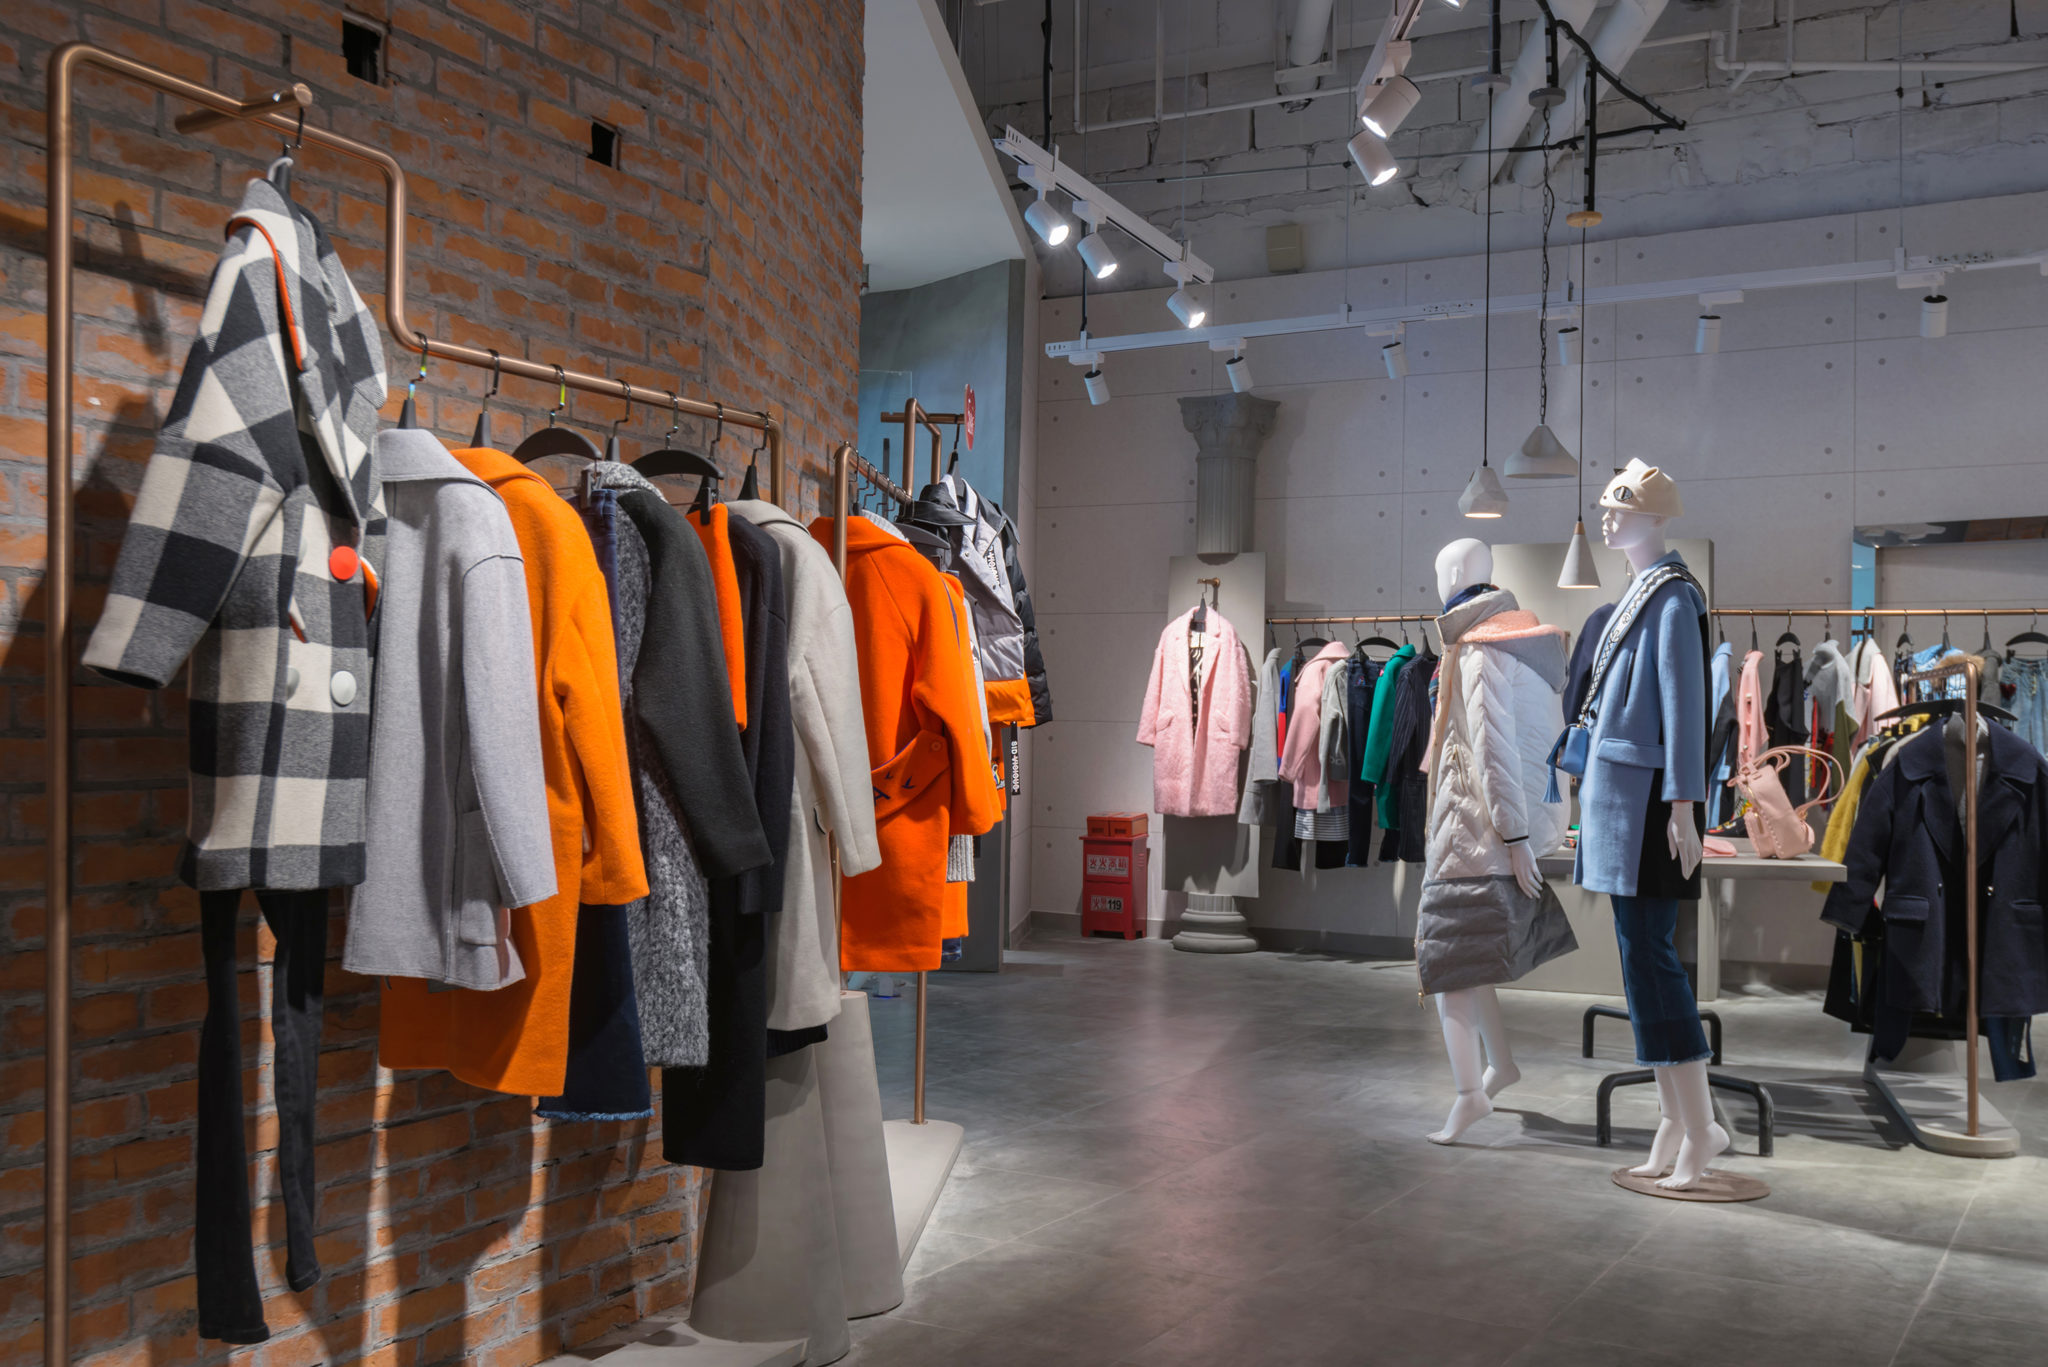 Fashion-Retailer Fall 2021 Fashion Trends: How to Keep Up With Fashion Trends